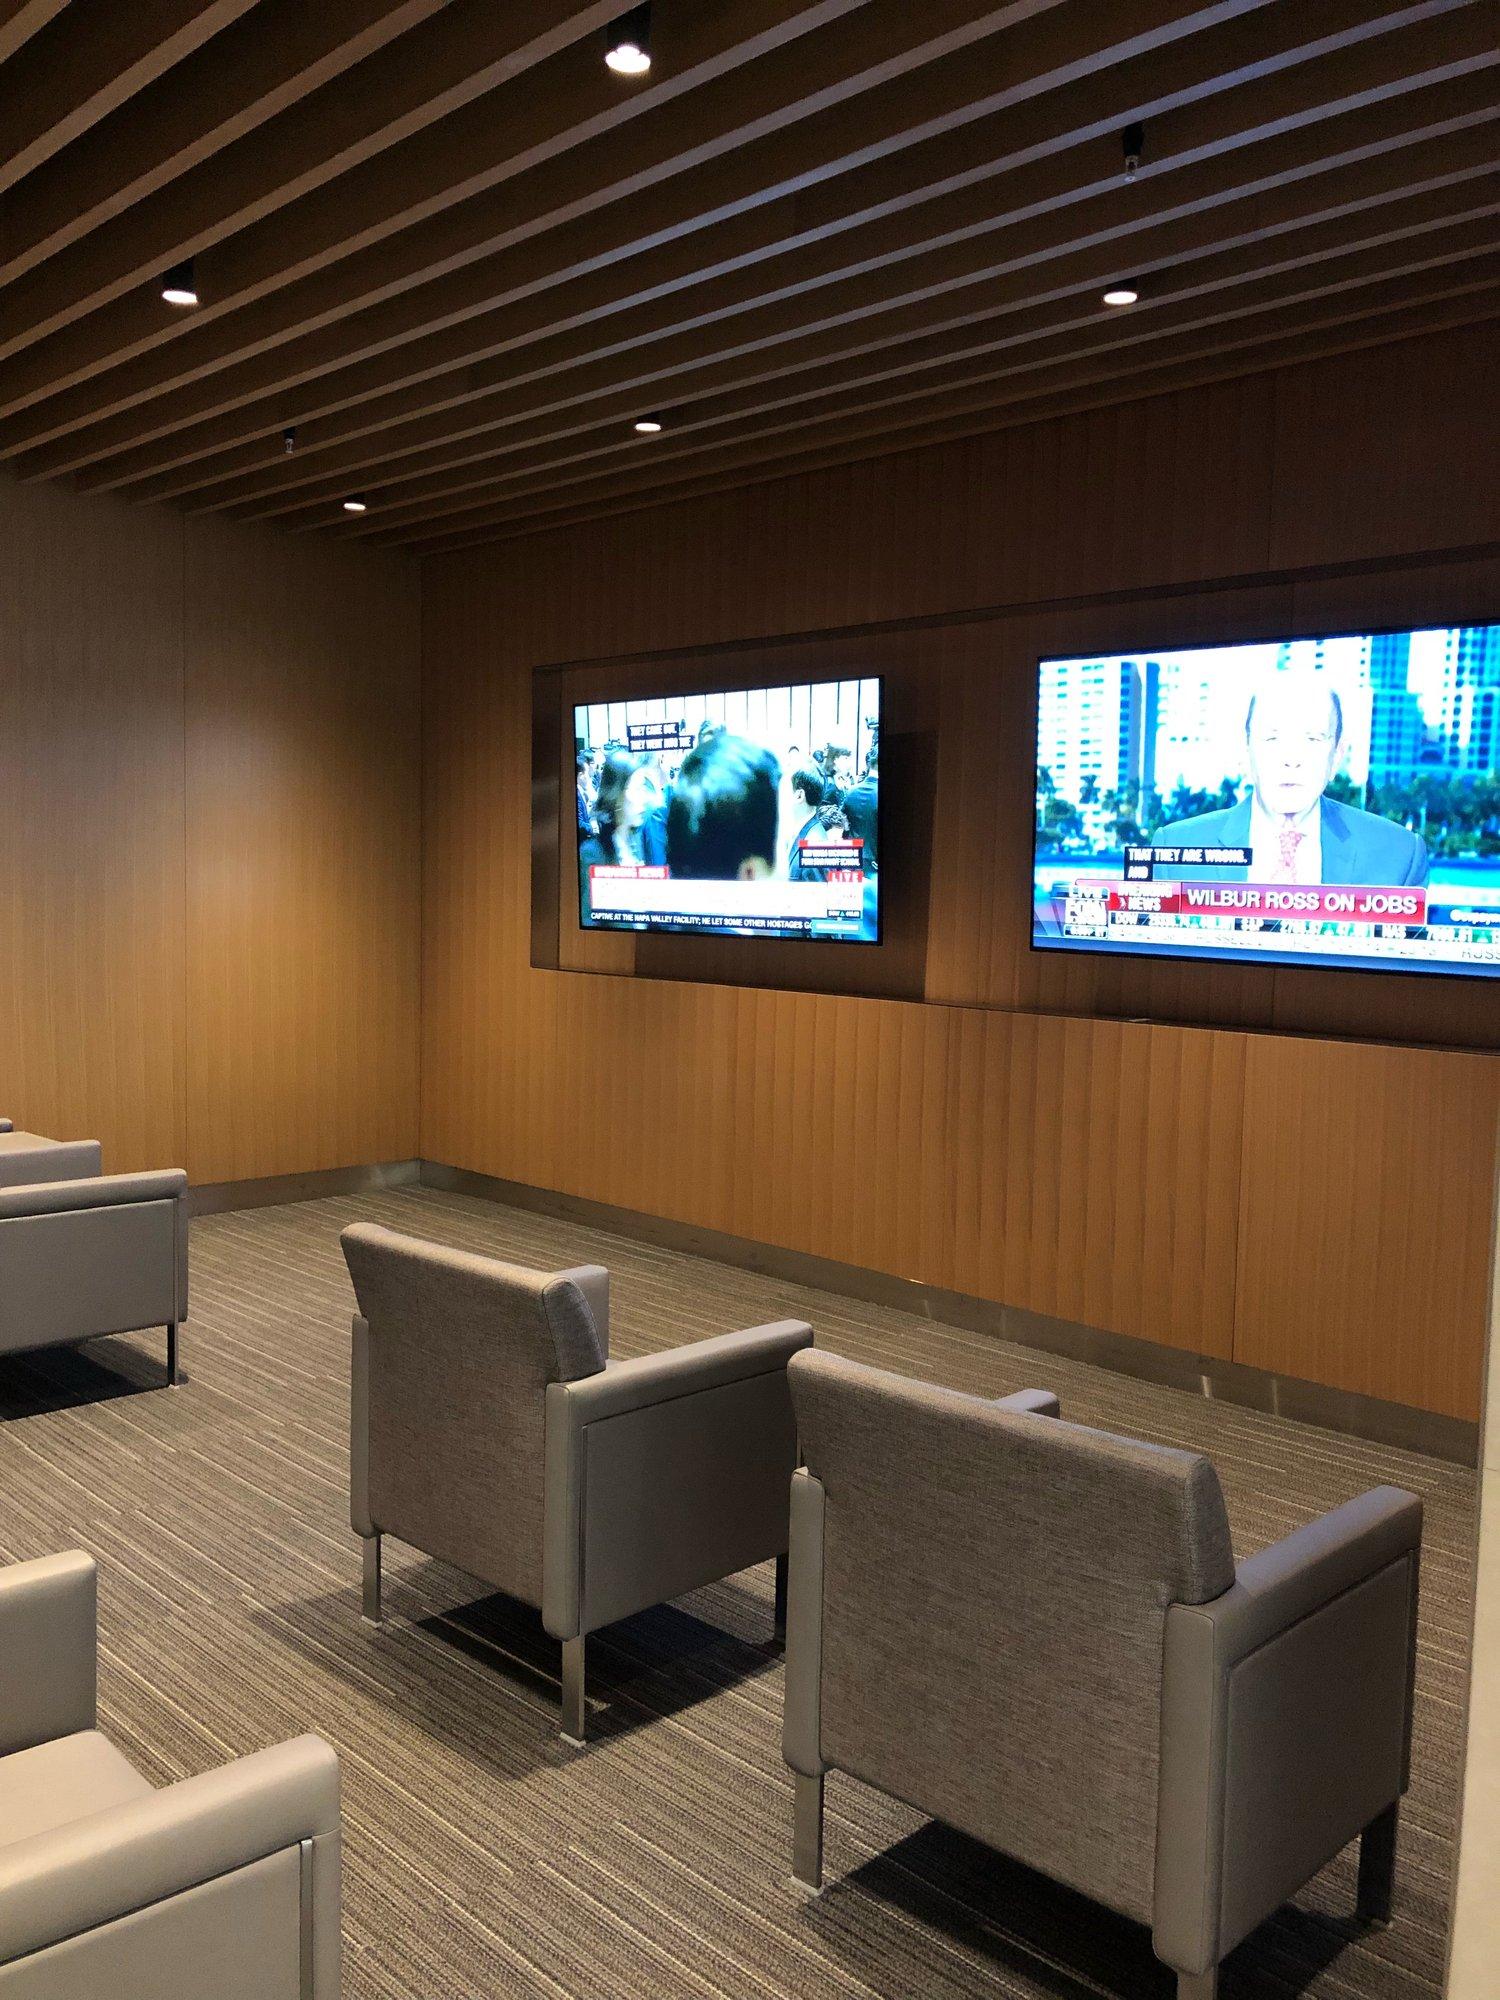 American Airlines Flagship Lounge image 61 of 65